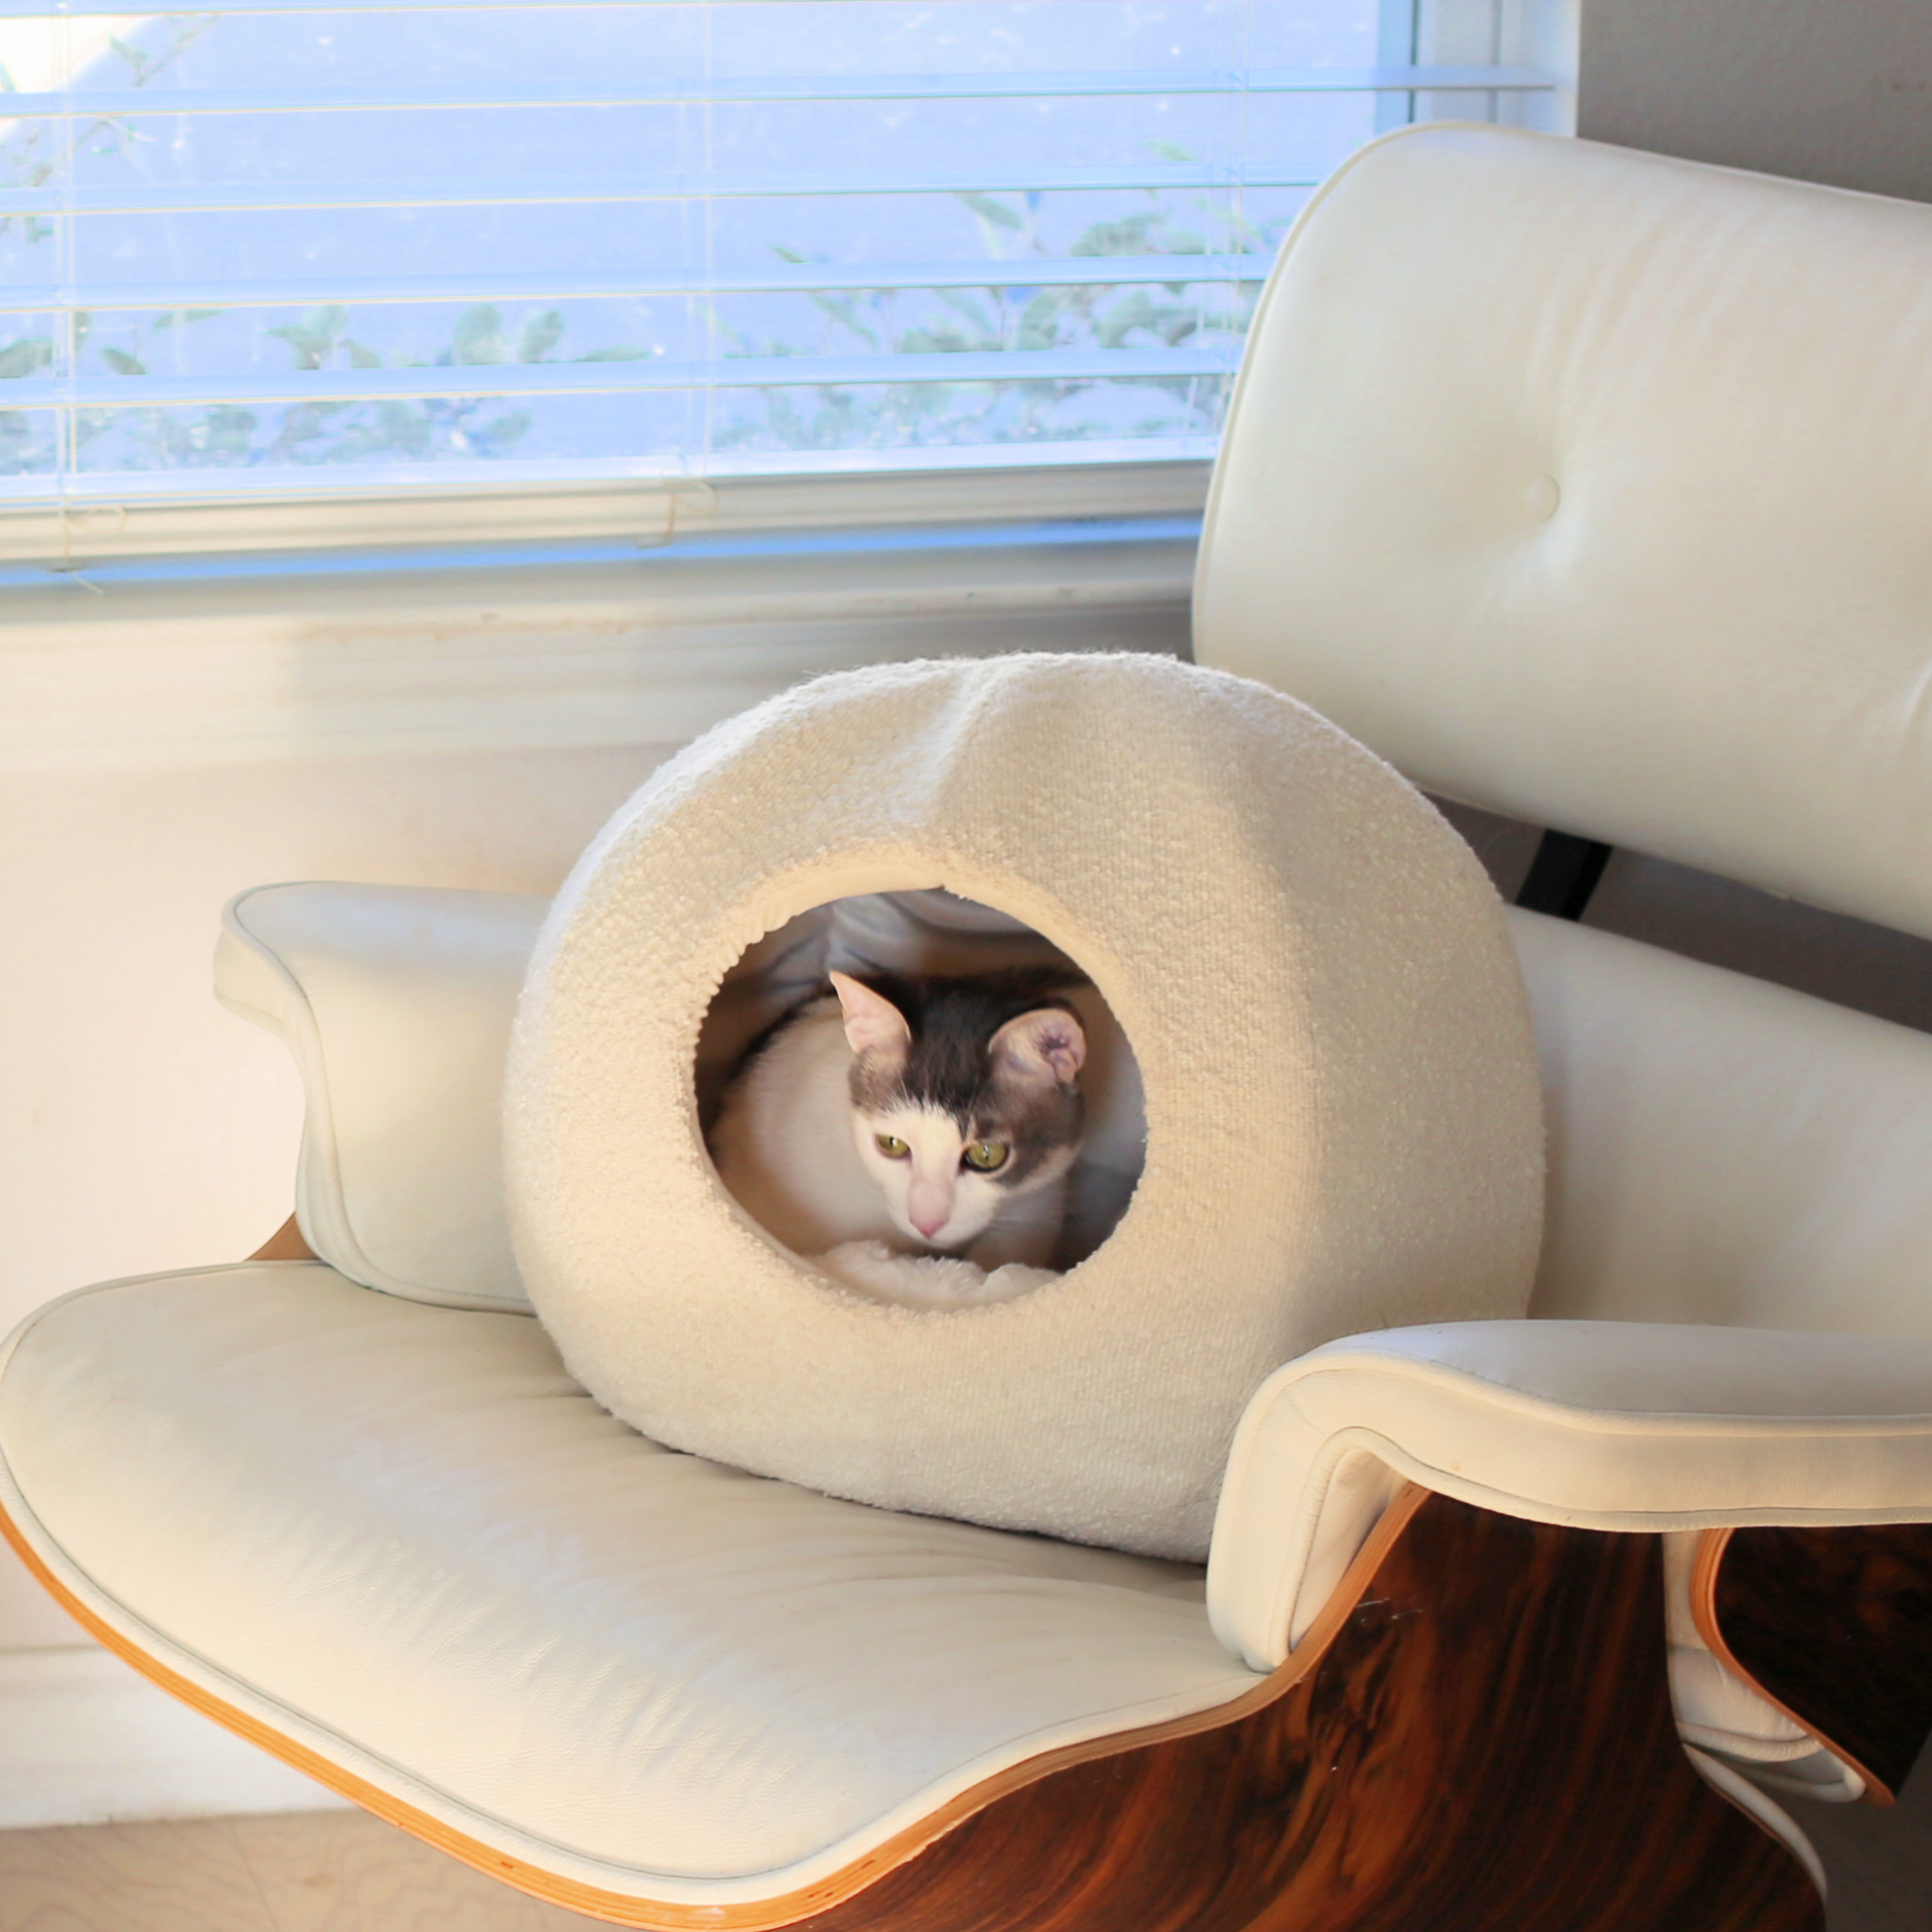 grey and white cat in cat hideaway cat cave bed by catenary home on eames herman miller chair is like a cat igloo, cat nest and cat hideaway all in one